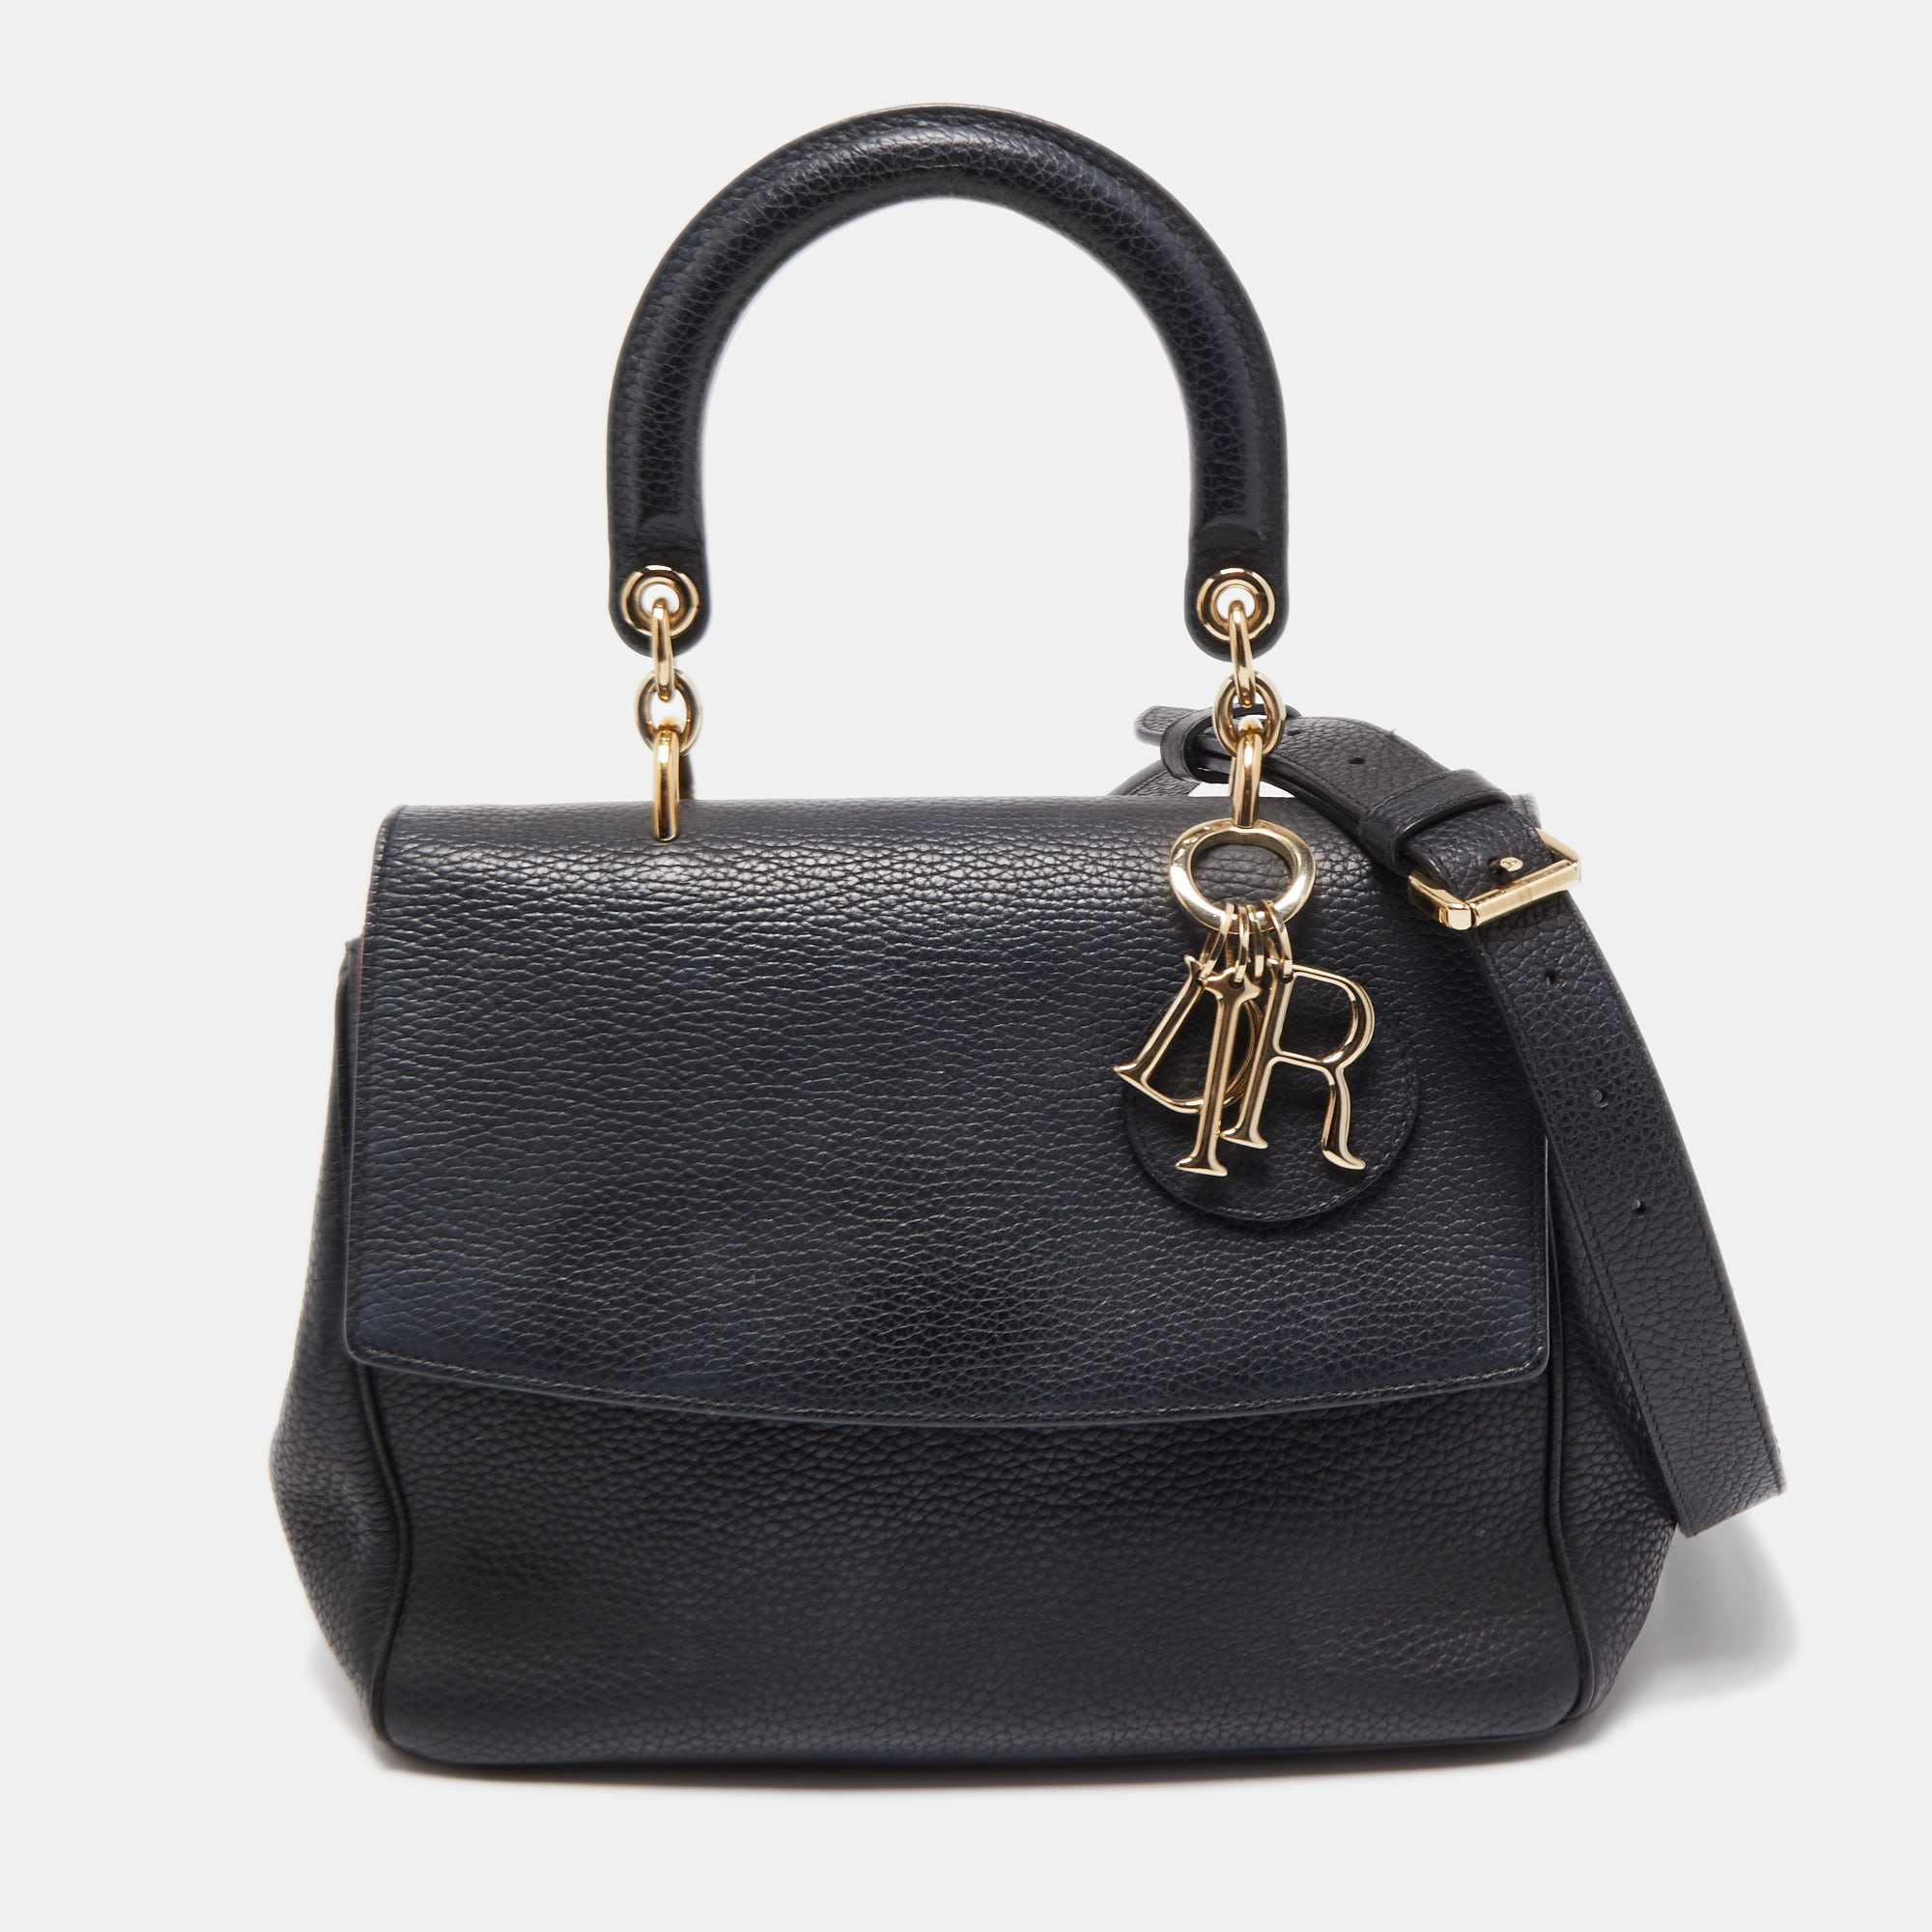 Dior Black Leather Small Be Dior Top Handle Bag